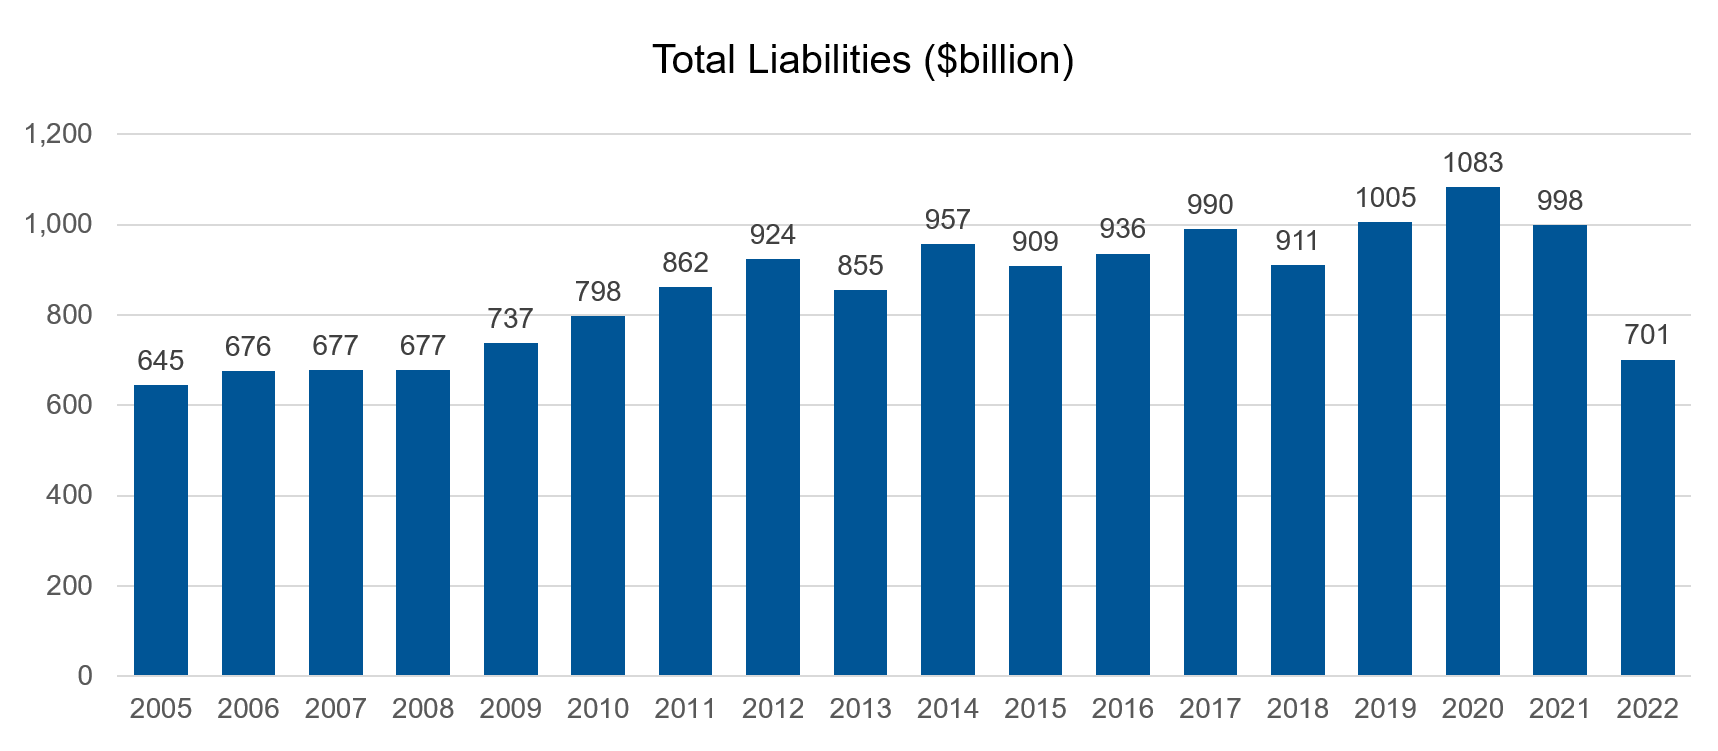 Bar chart with total liabilities ($billion) from 2005 to 2022